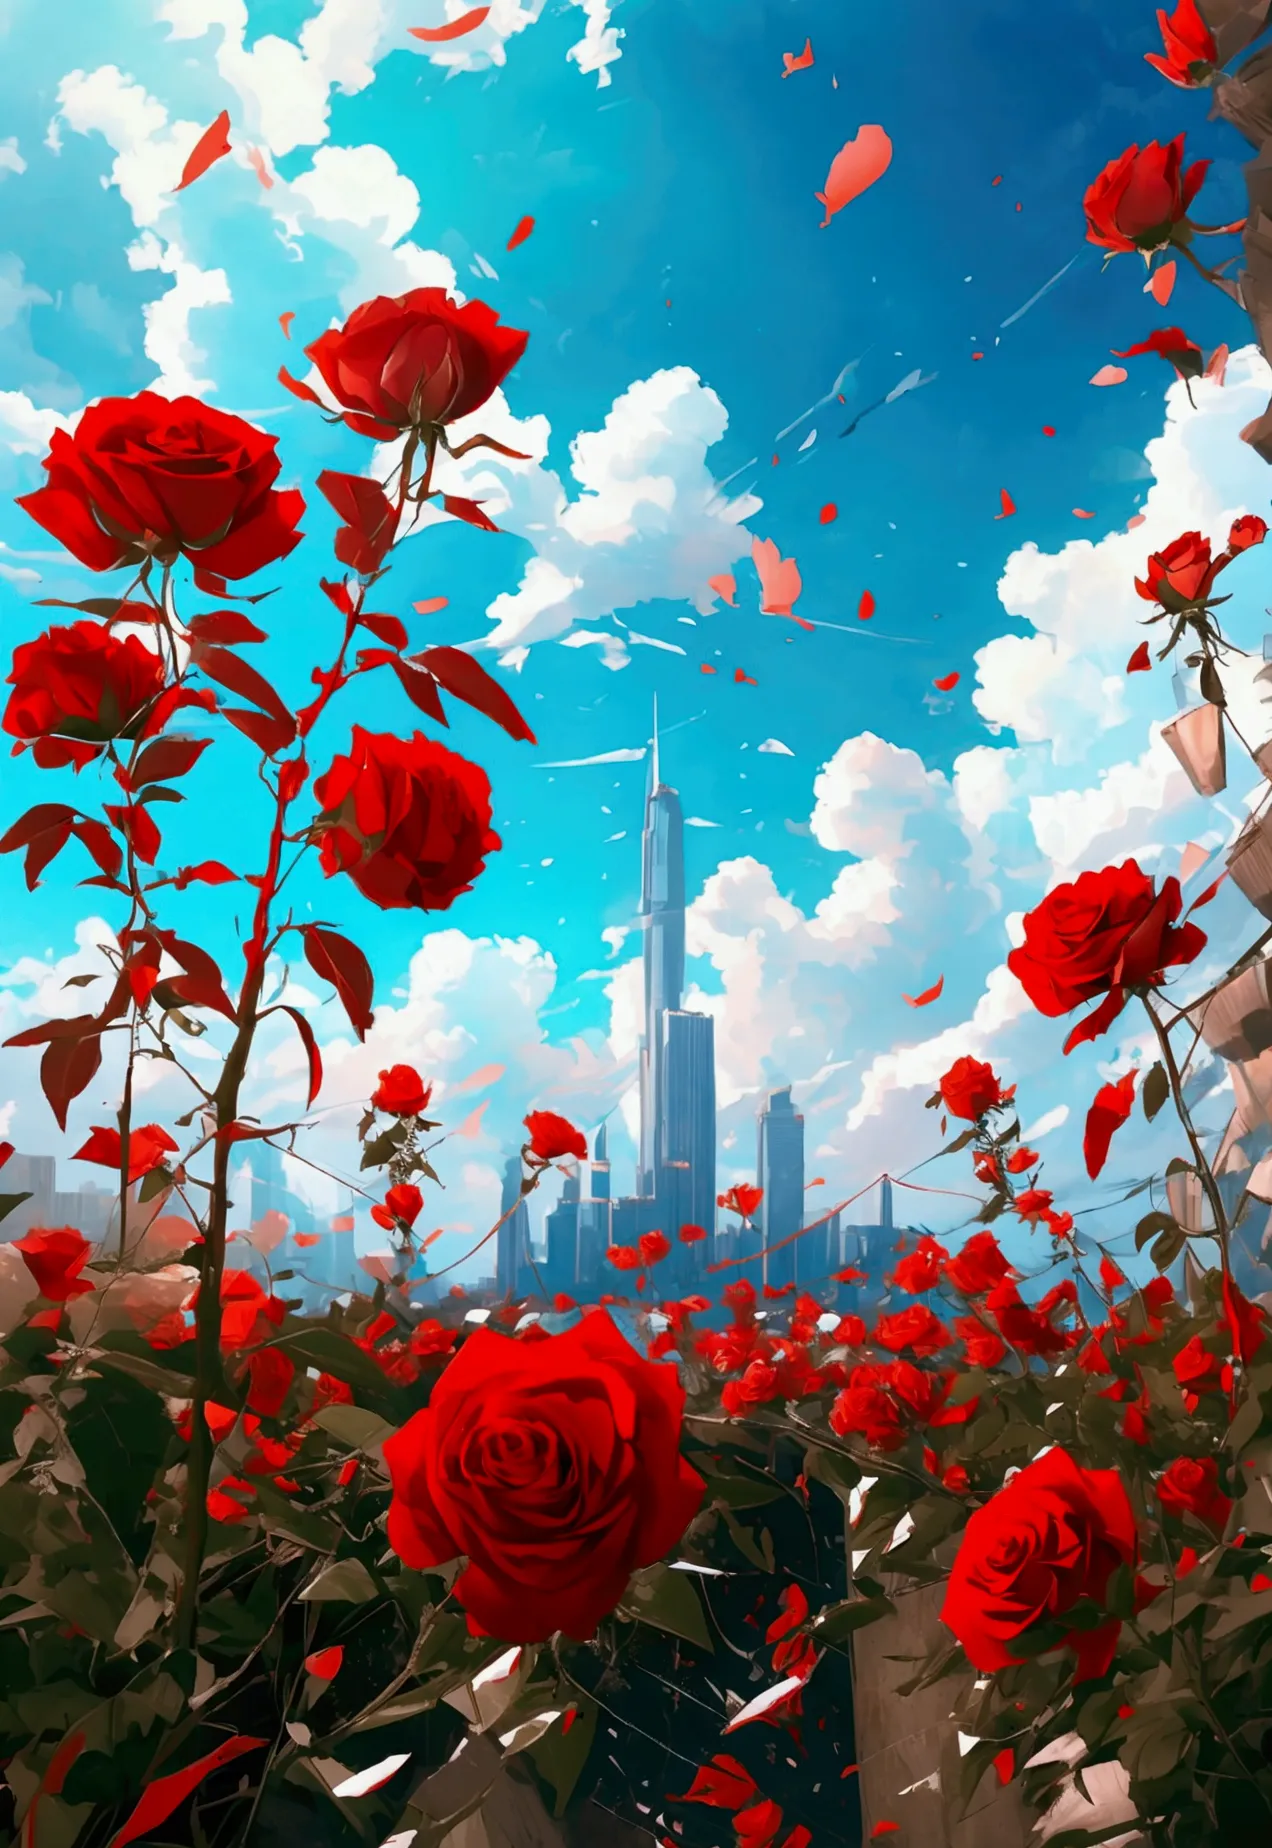 Roses grow lush，Red particles were floating in the sky，A skyscraper filled with vines，Wilderness Wind，Apocalyptic